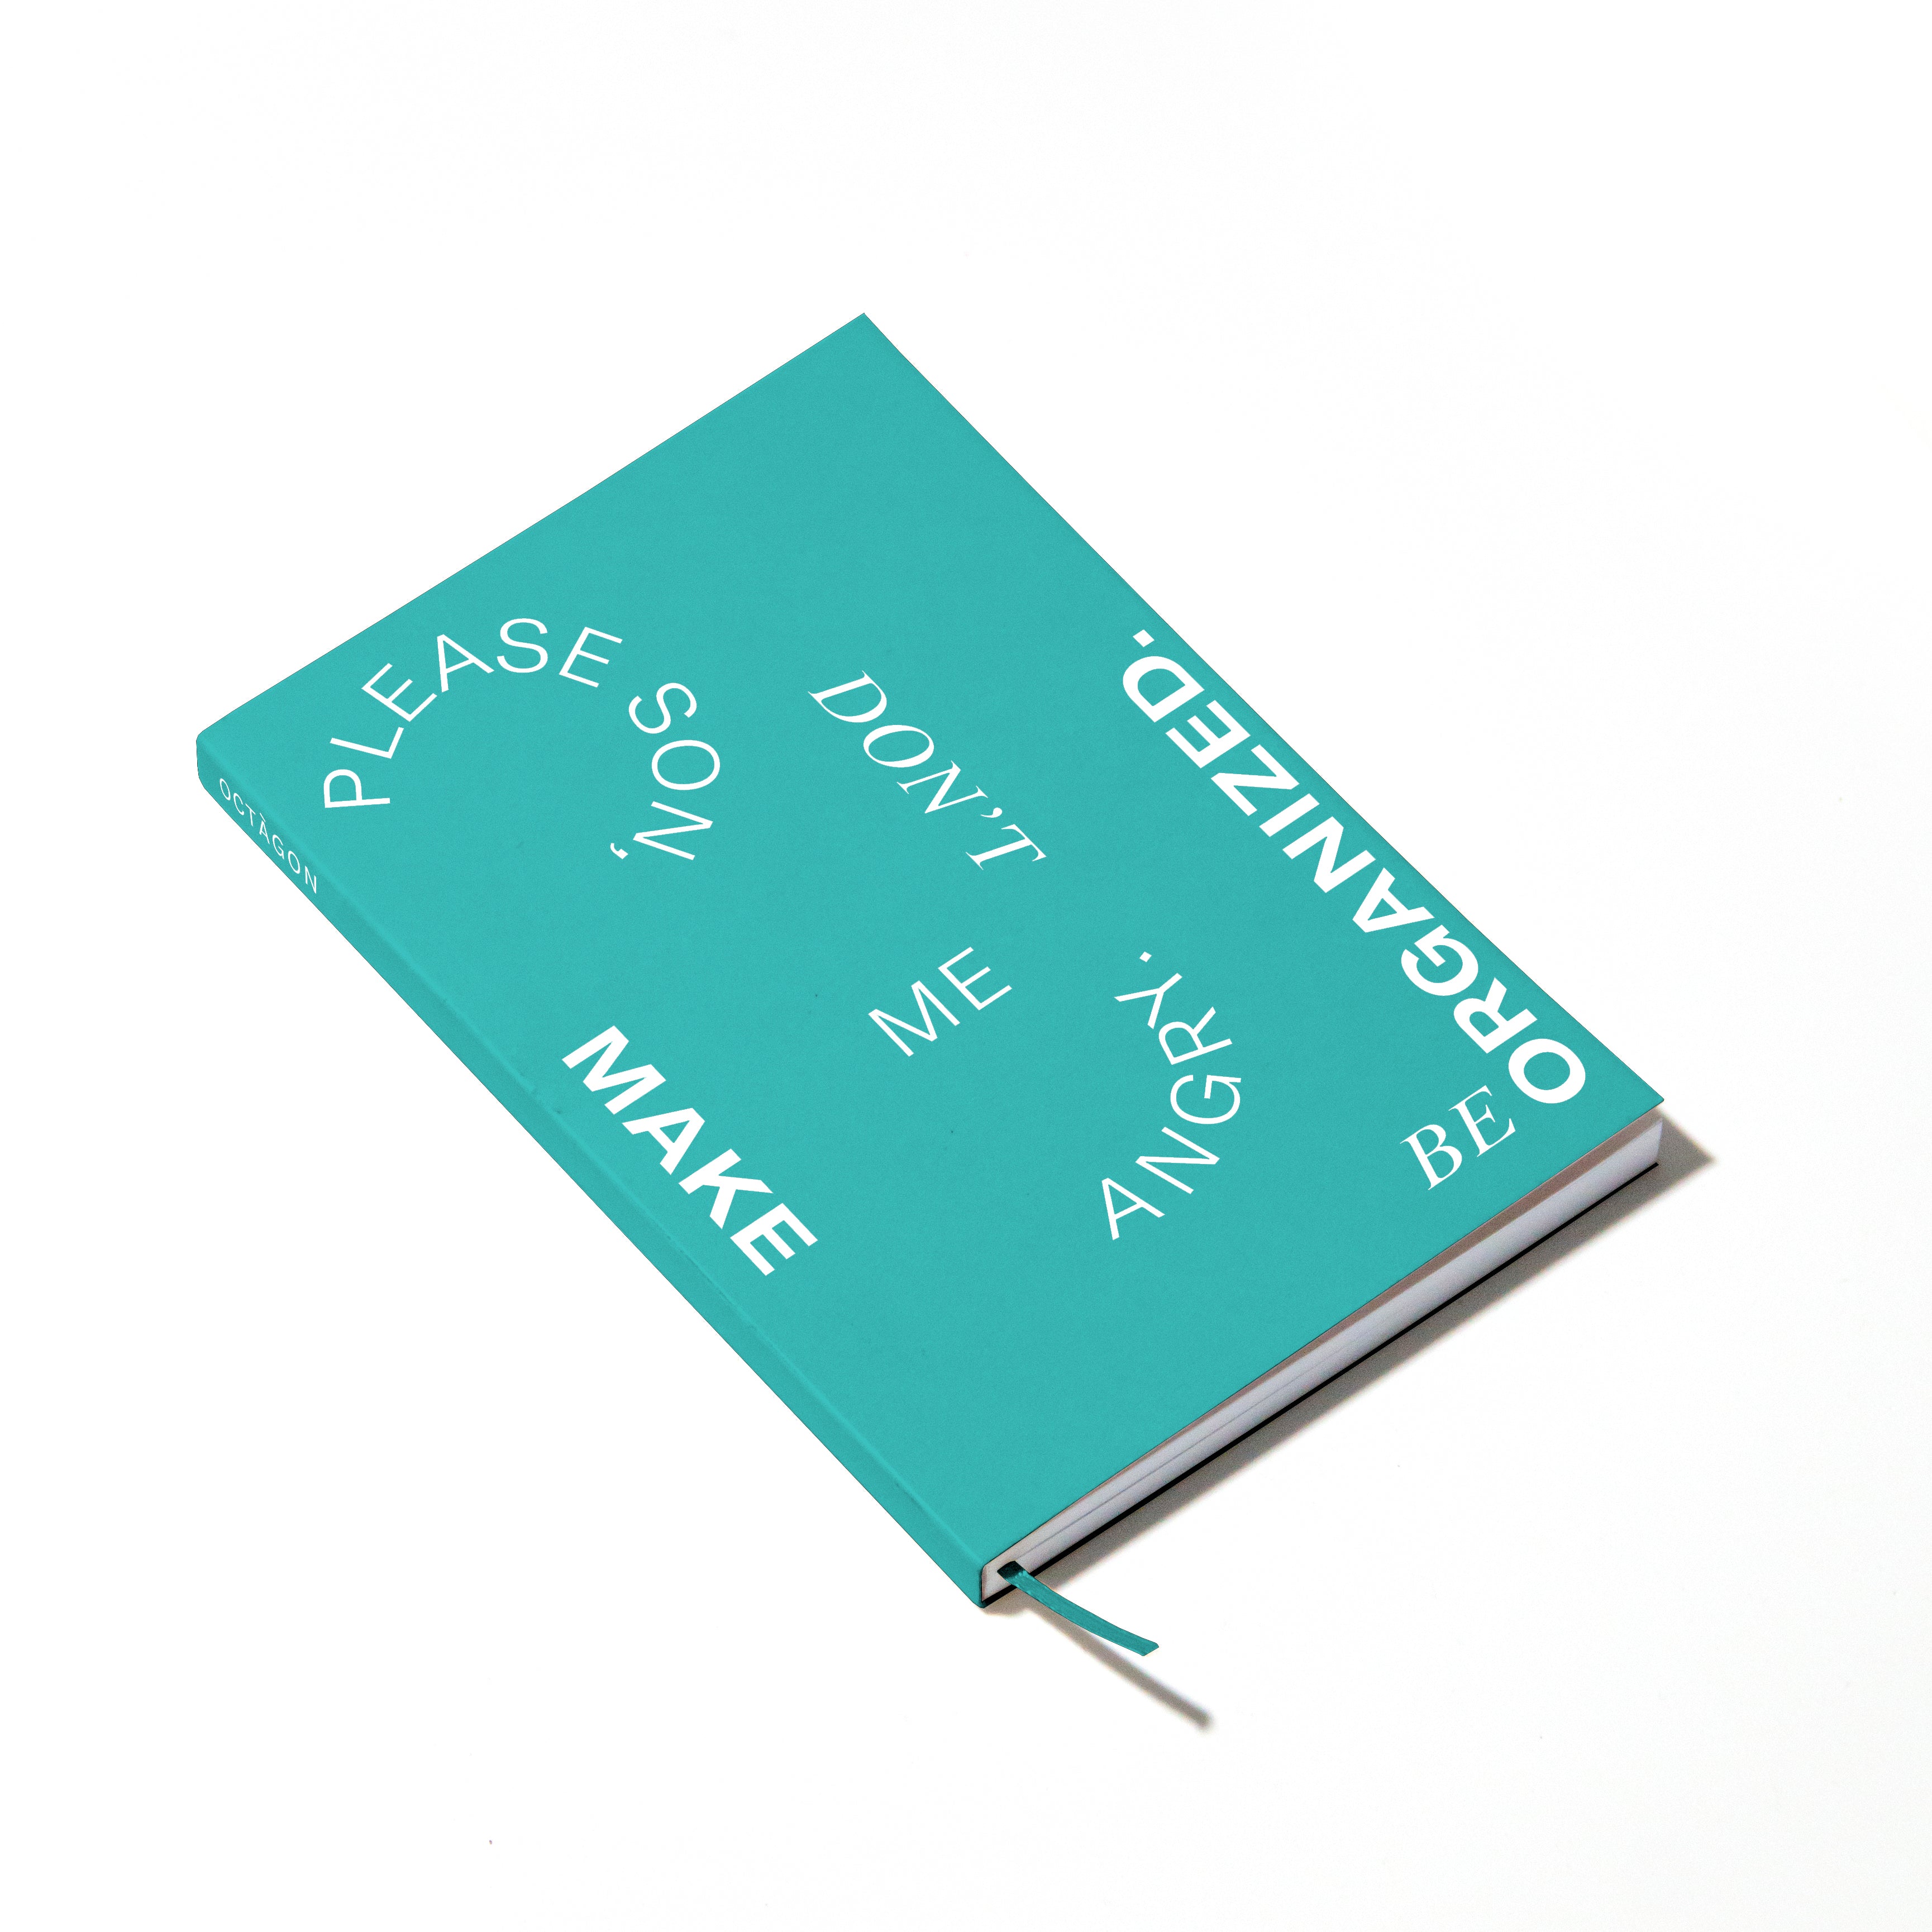 OCTÀGON DESIGN | Organized Notebook | Blue cover with white typography.